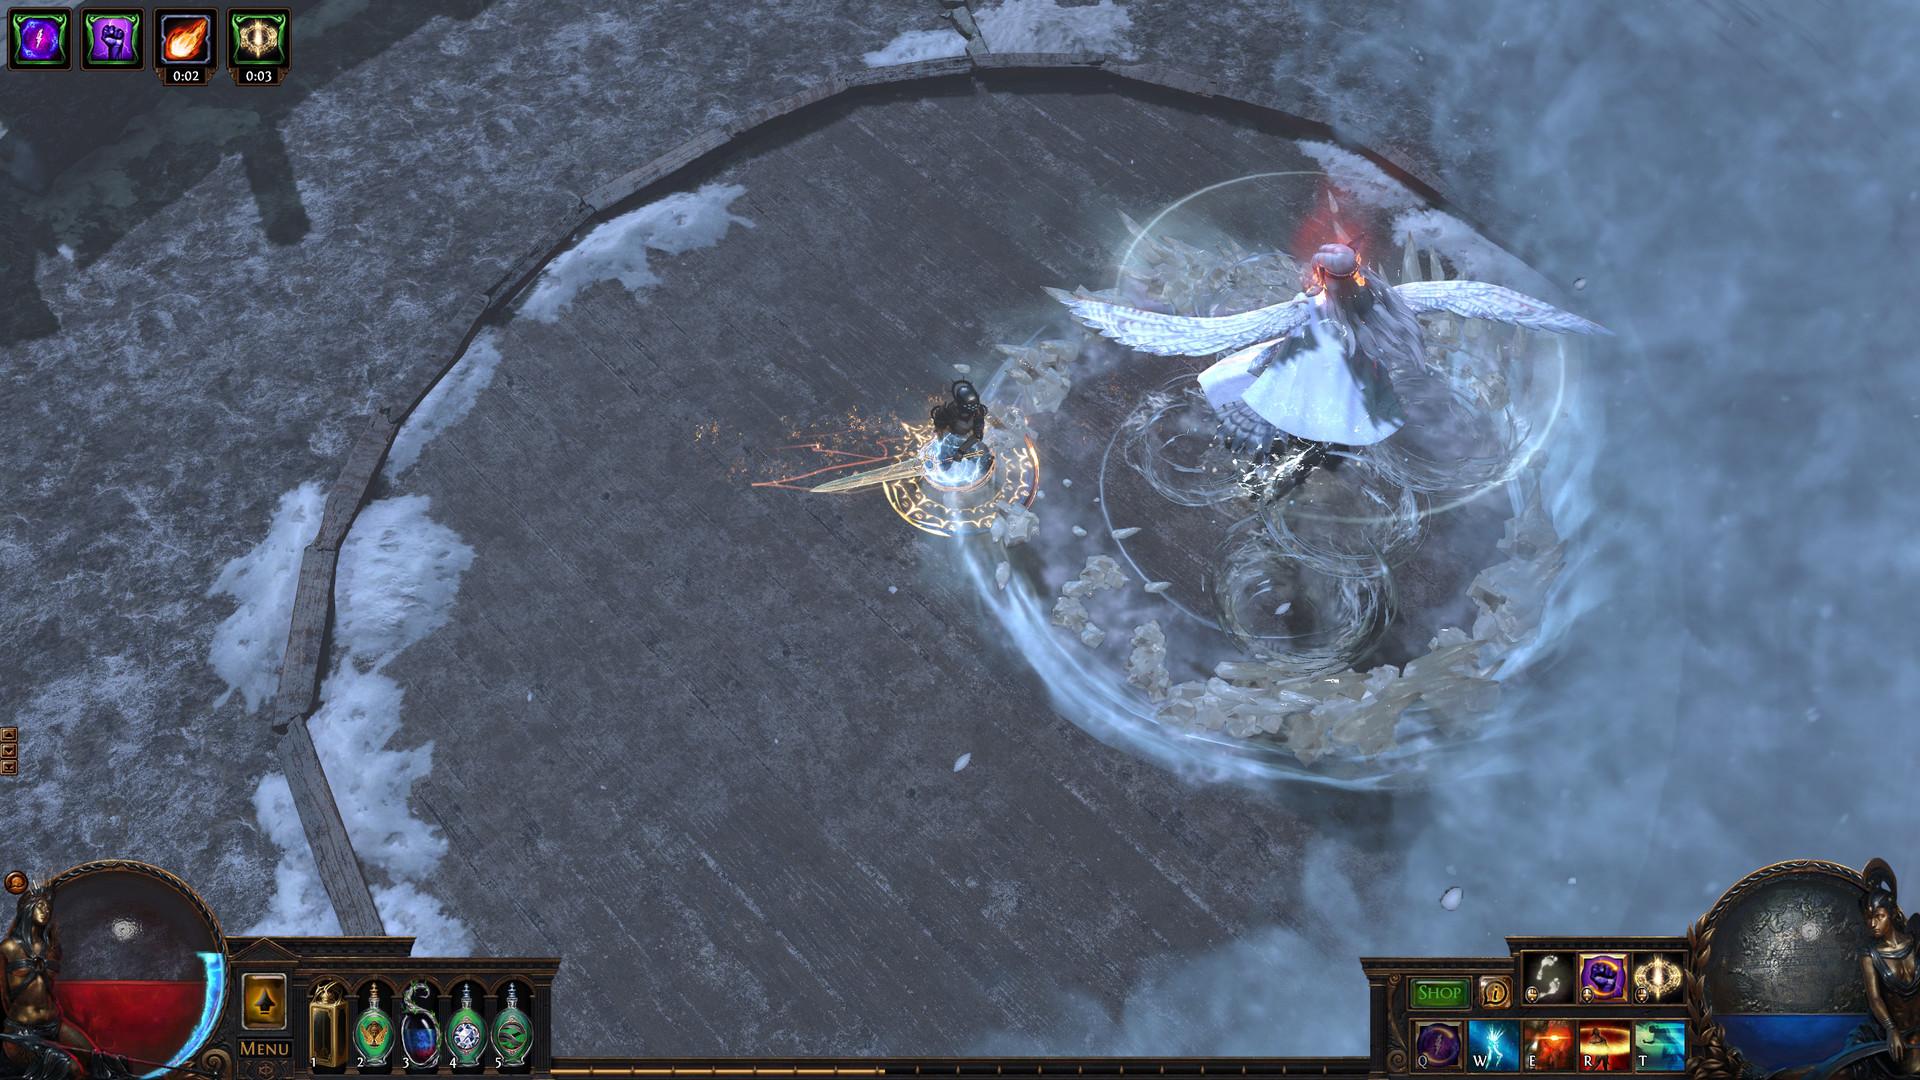 Screenshot №22 from game Path of Exile